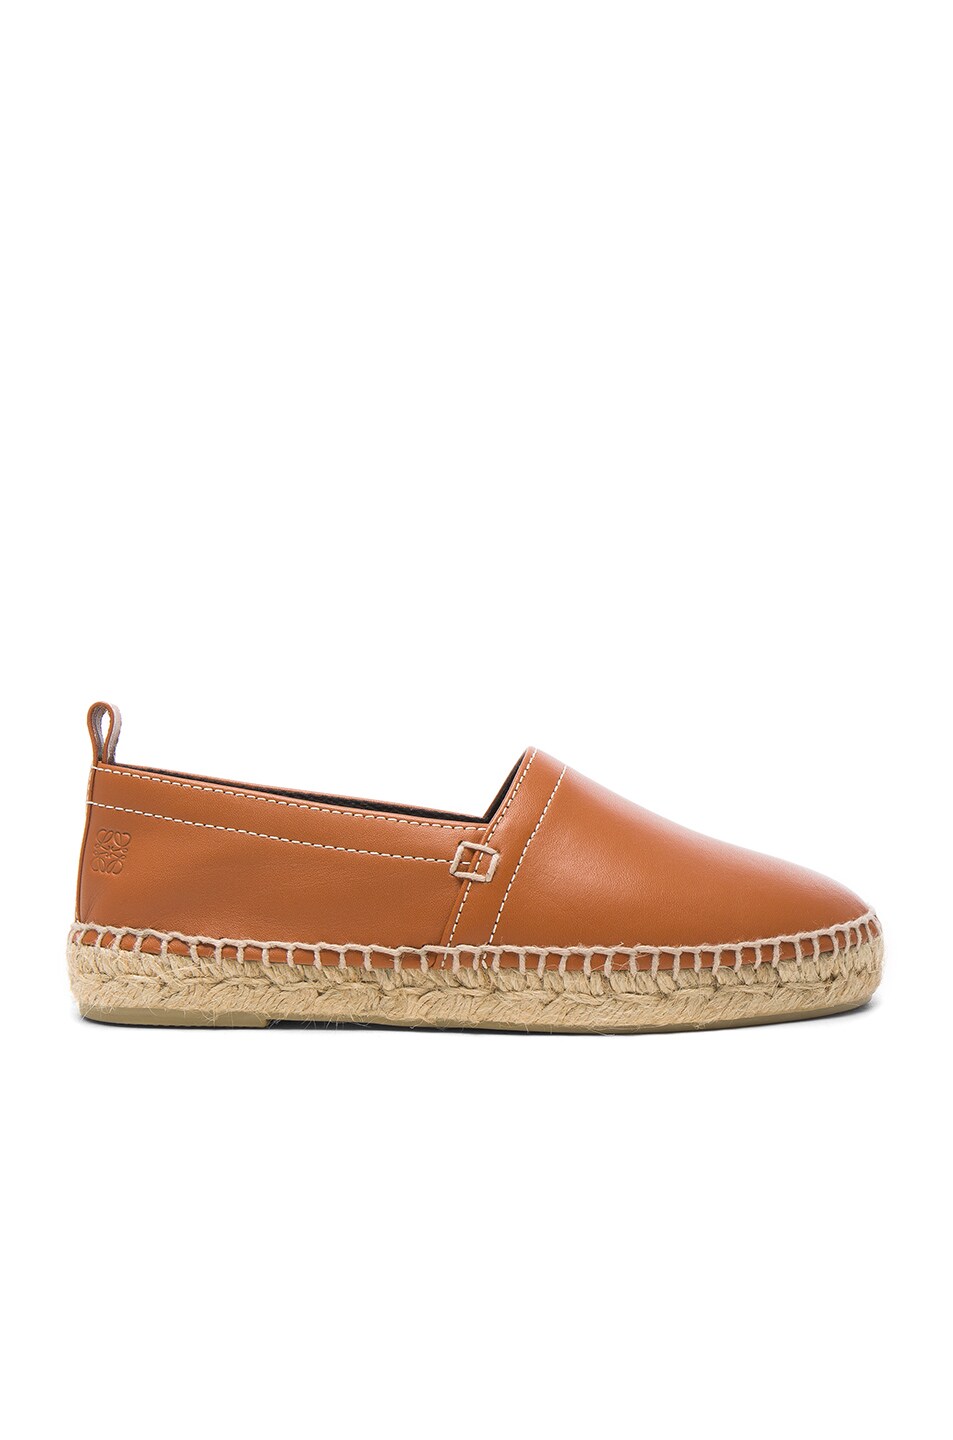 Image 1 of Loewe Contrast Stitching Leather Espadrilles in Tan